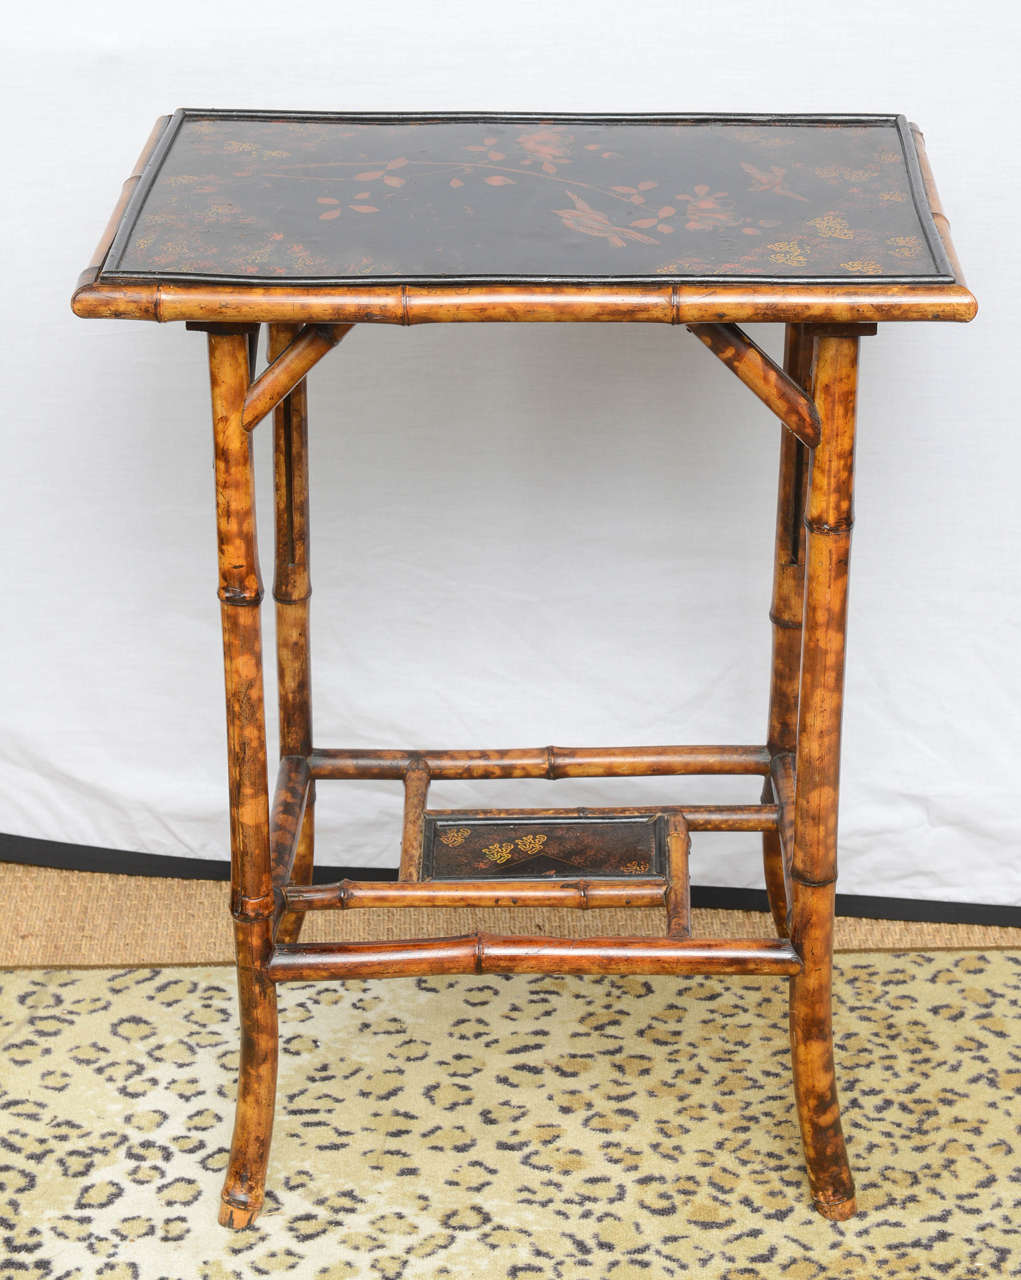 Beautiful Lacquer Bamboo SIde Table.